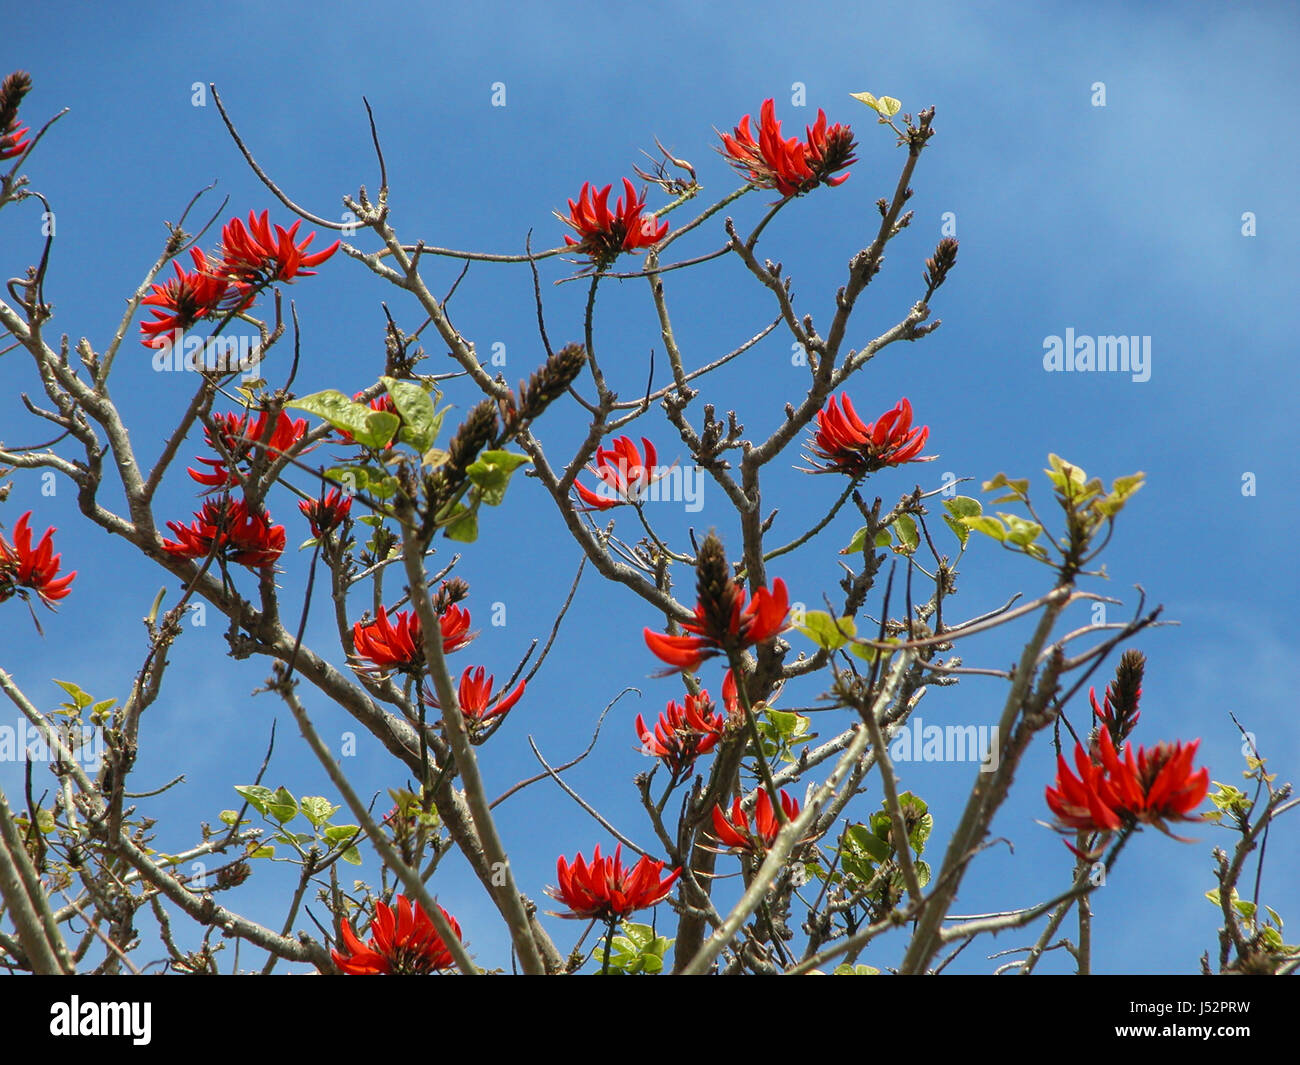 Flowers of Coral Tree (Erythrina), also known as the Flame Tree: Vaucluse, Sydney, NSW, Australia Stock Photo